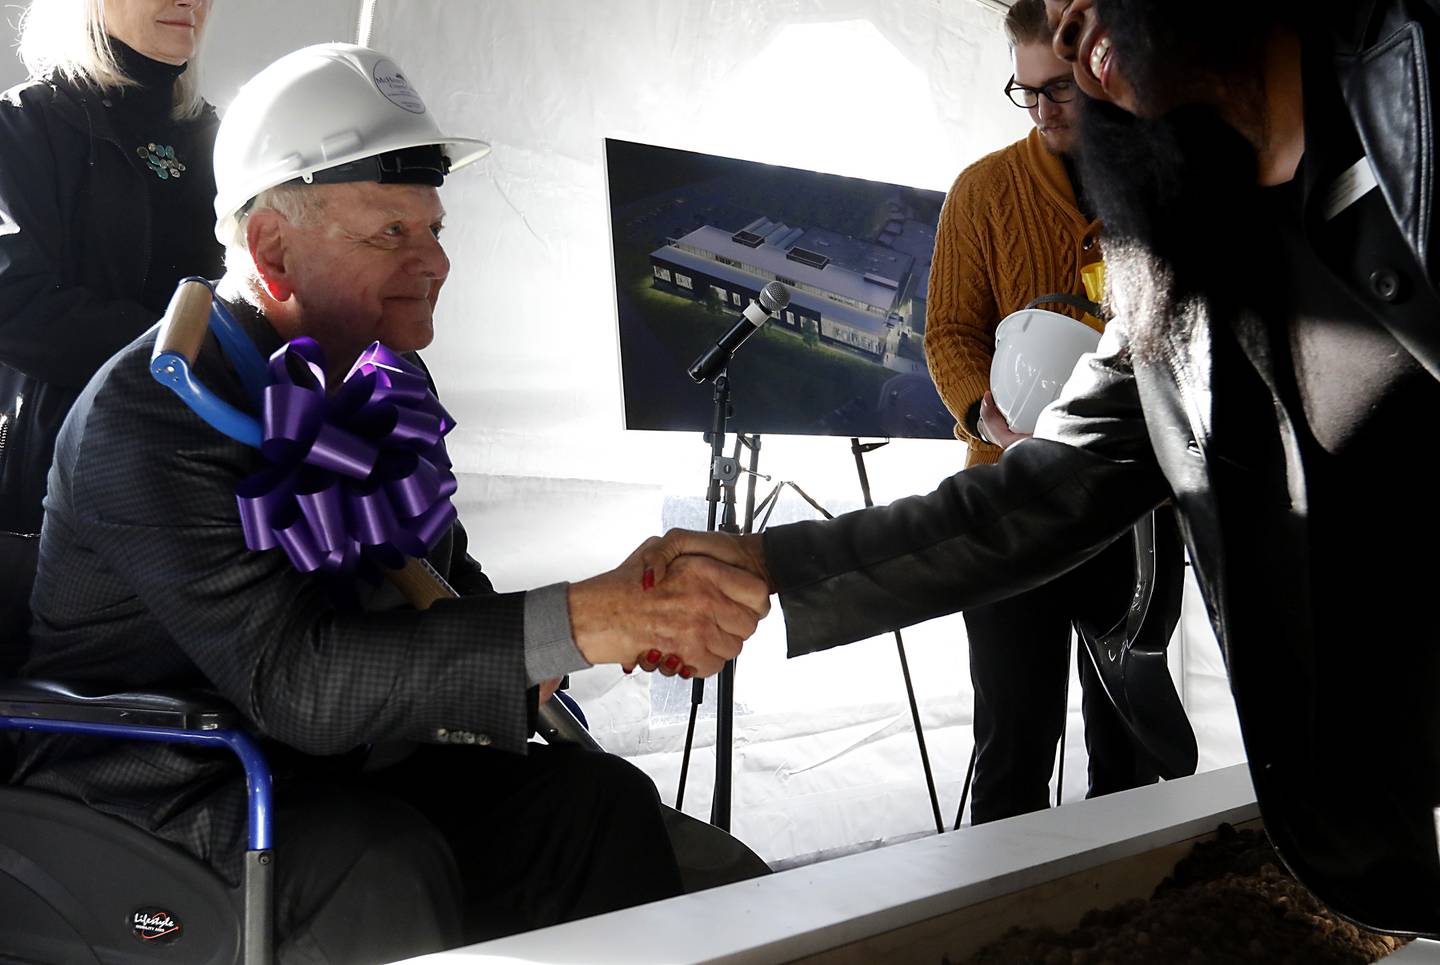 Former Sage Products Chairman and CEO and current Foglia Family Foundation Vice President Vince Foglia shakes hands Wednesday, Oct. 19, 2022, during a groundbreaking ceremony for McHenry County College’s Foglia Center for Advanced Technology and Innovation at the Crystal Lake campus.  During the ceremony, speakers spoke about the future of learning in the new center along with education's role in economic development.